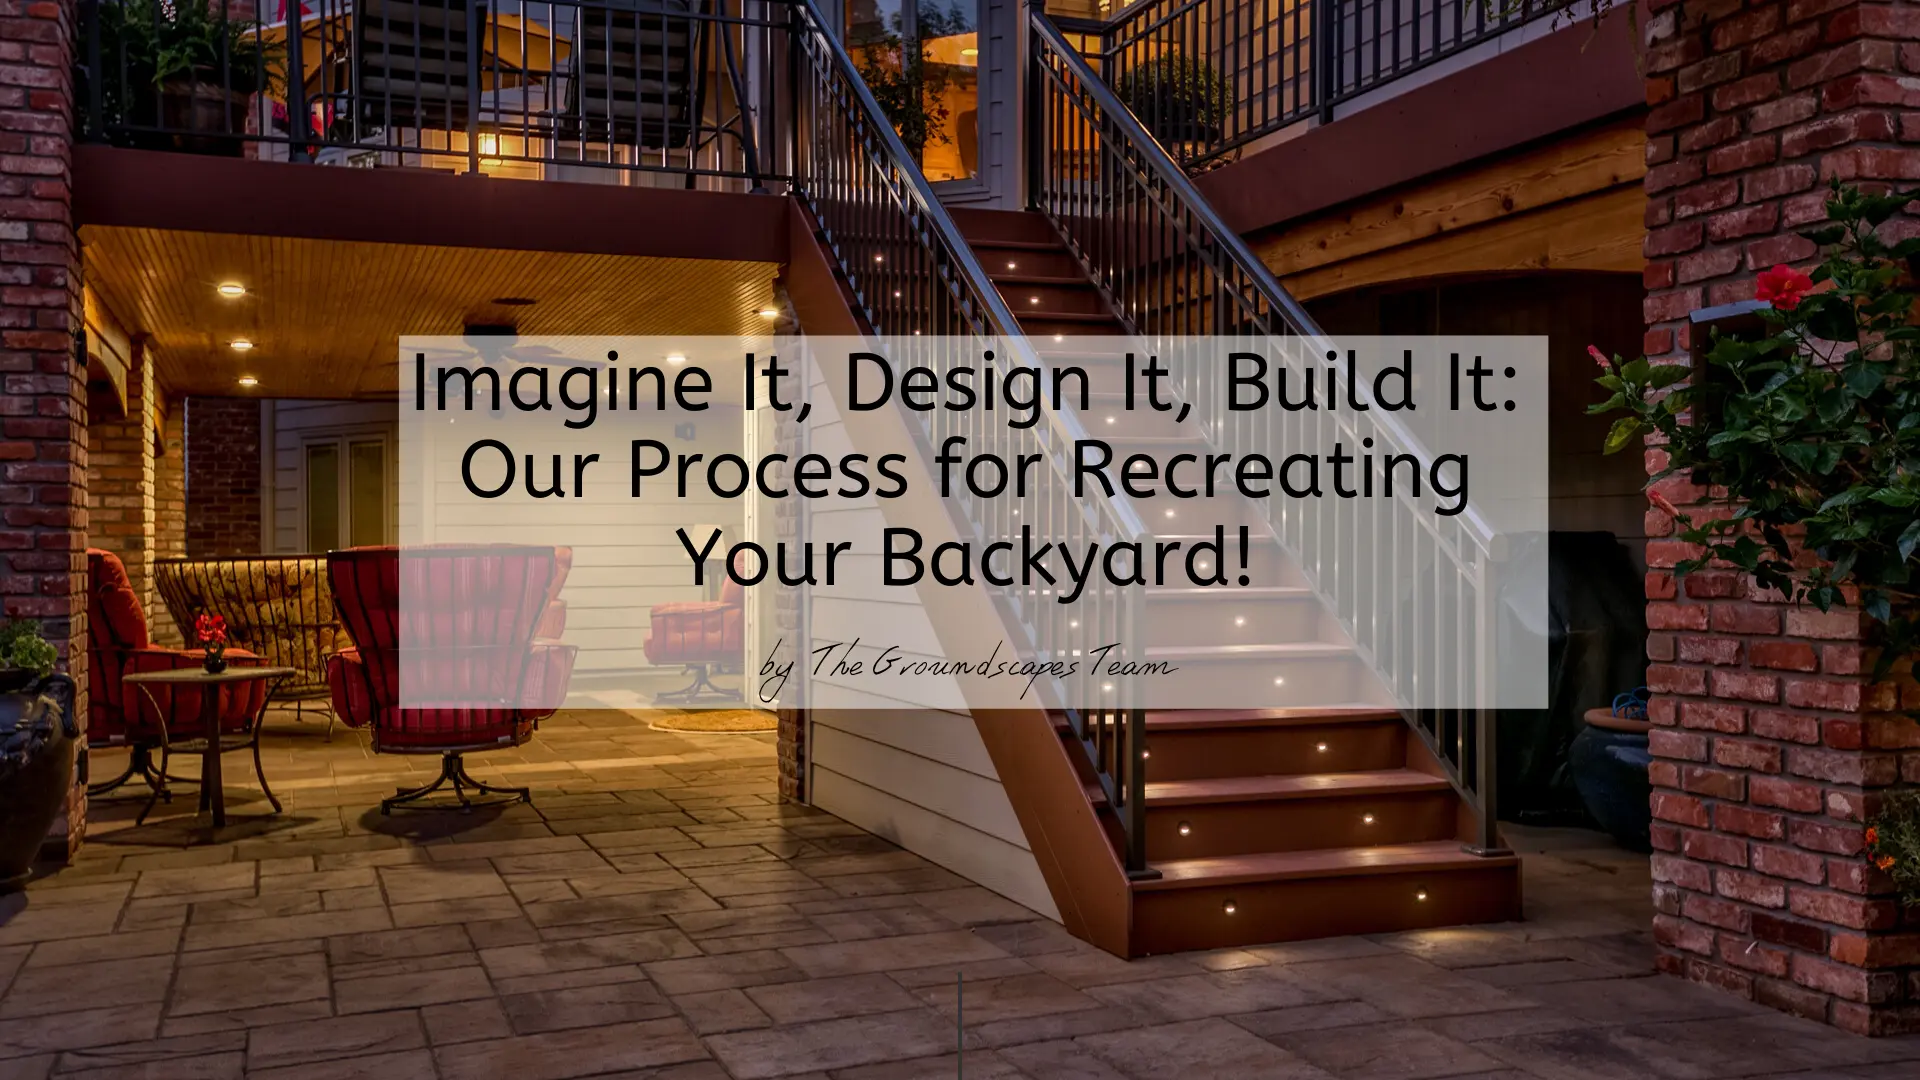 Imagine It, Design It, Build It: Our Process for Recreating Your Backyard!